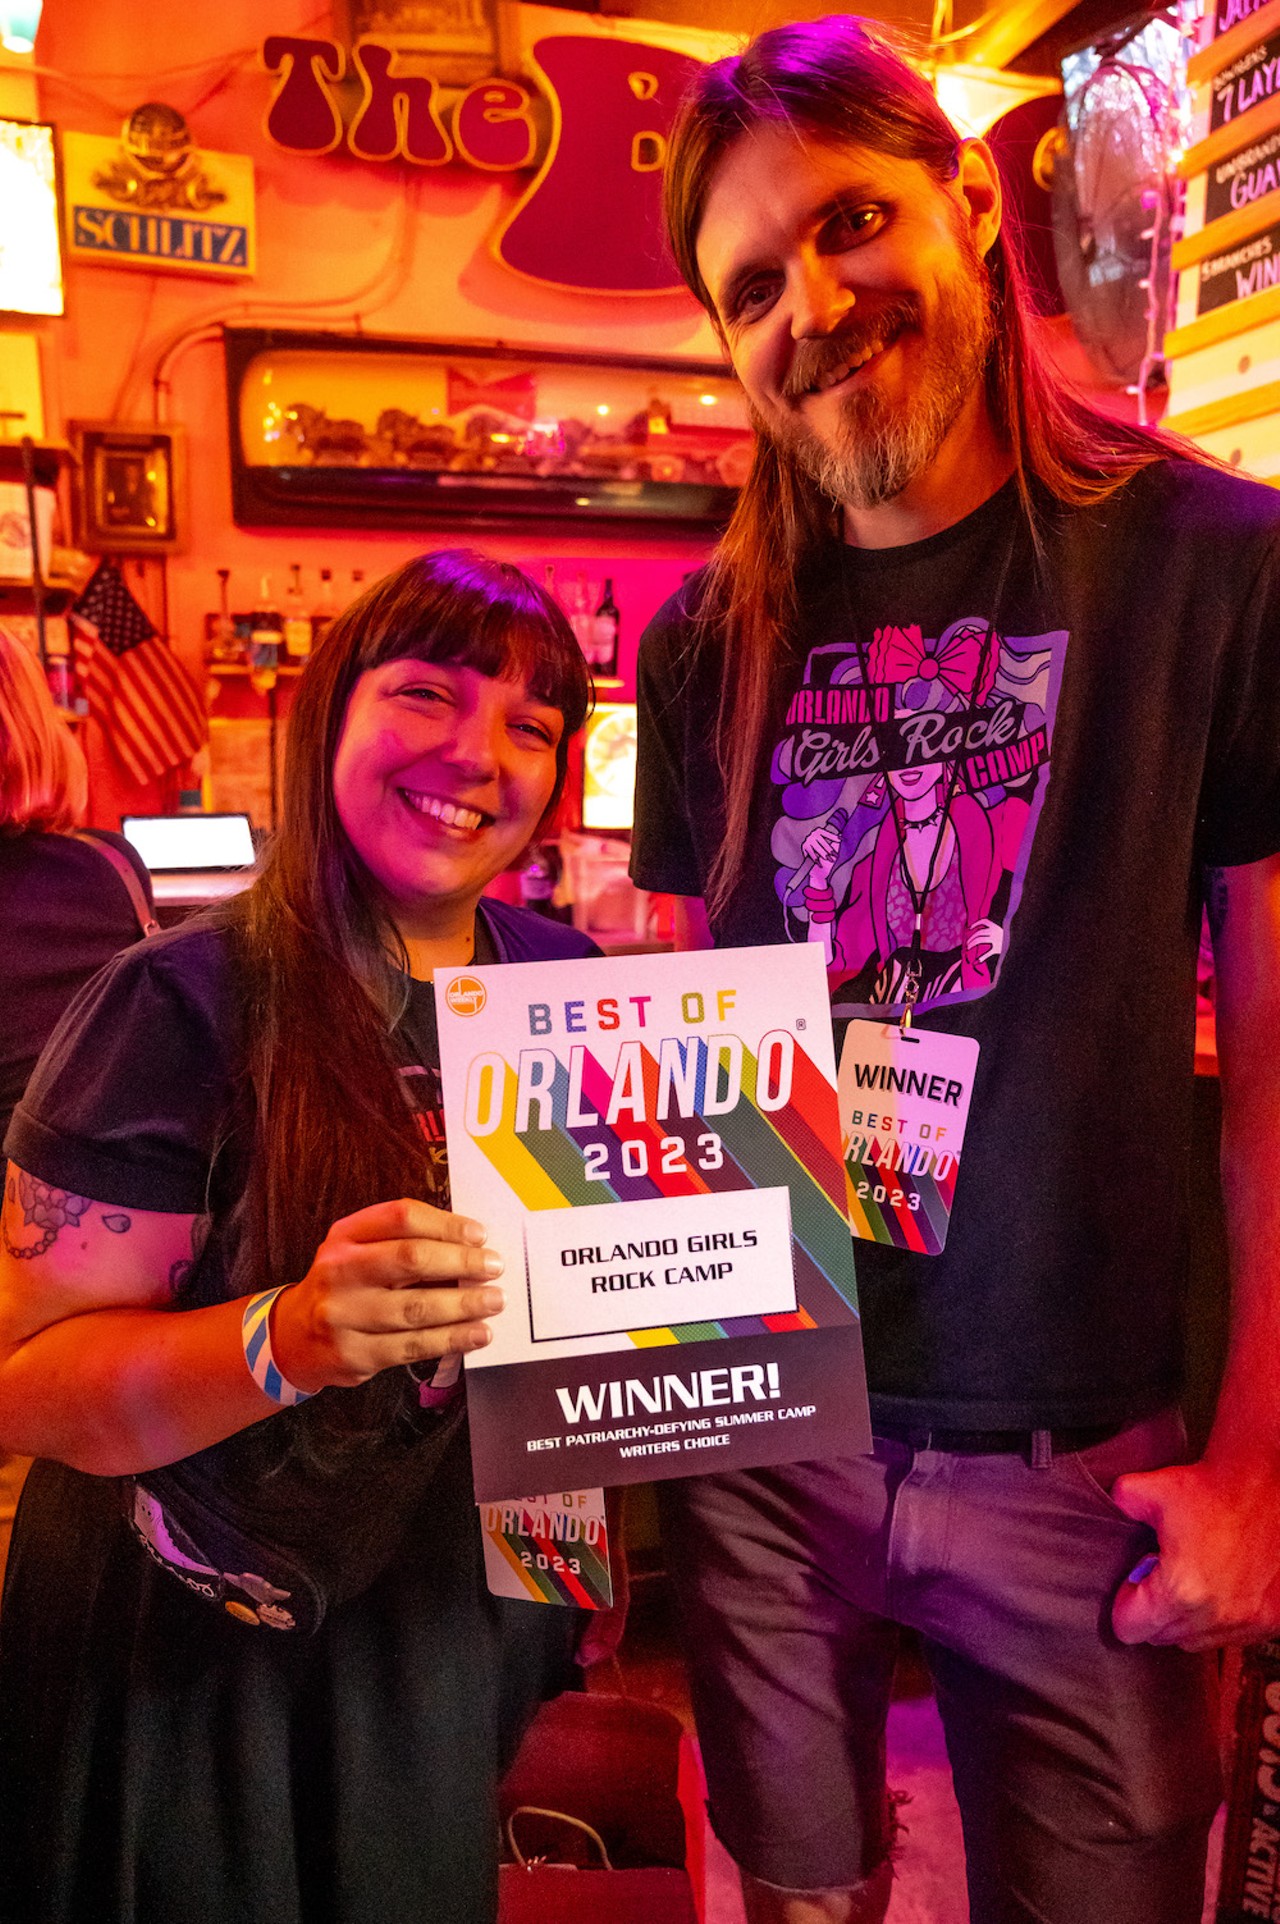 Everything we saw at the 'Best of Orlando' celebration at Will's Pub